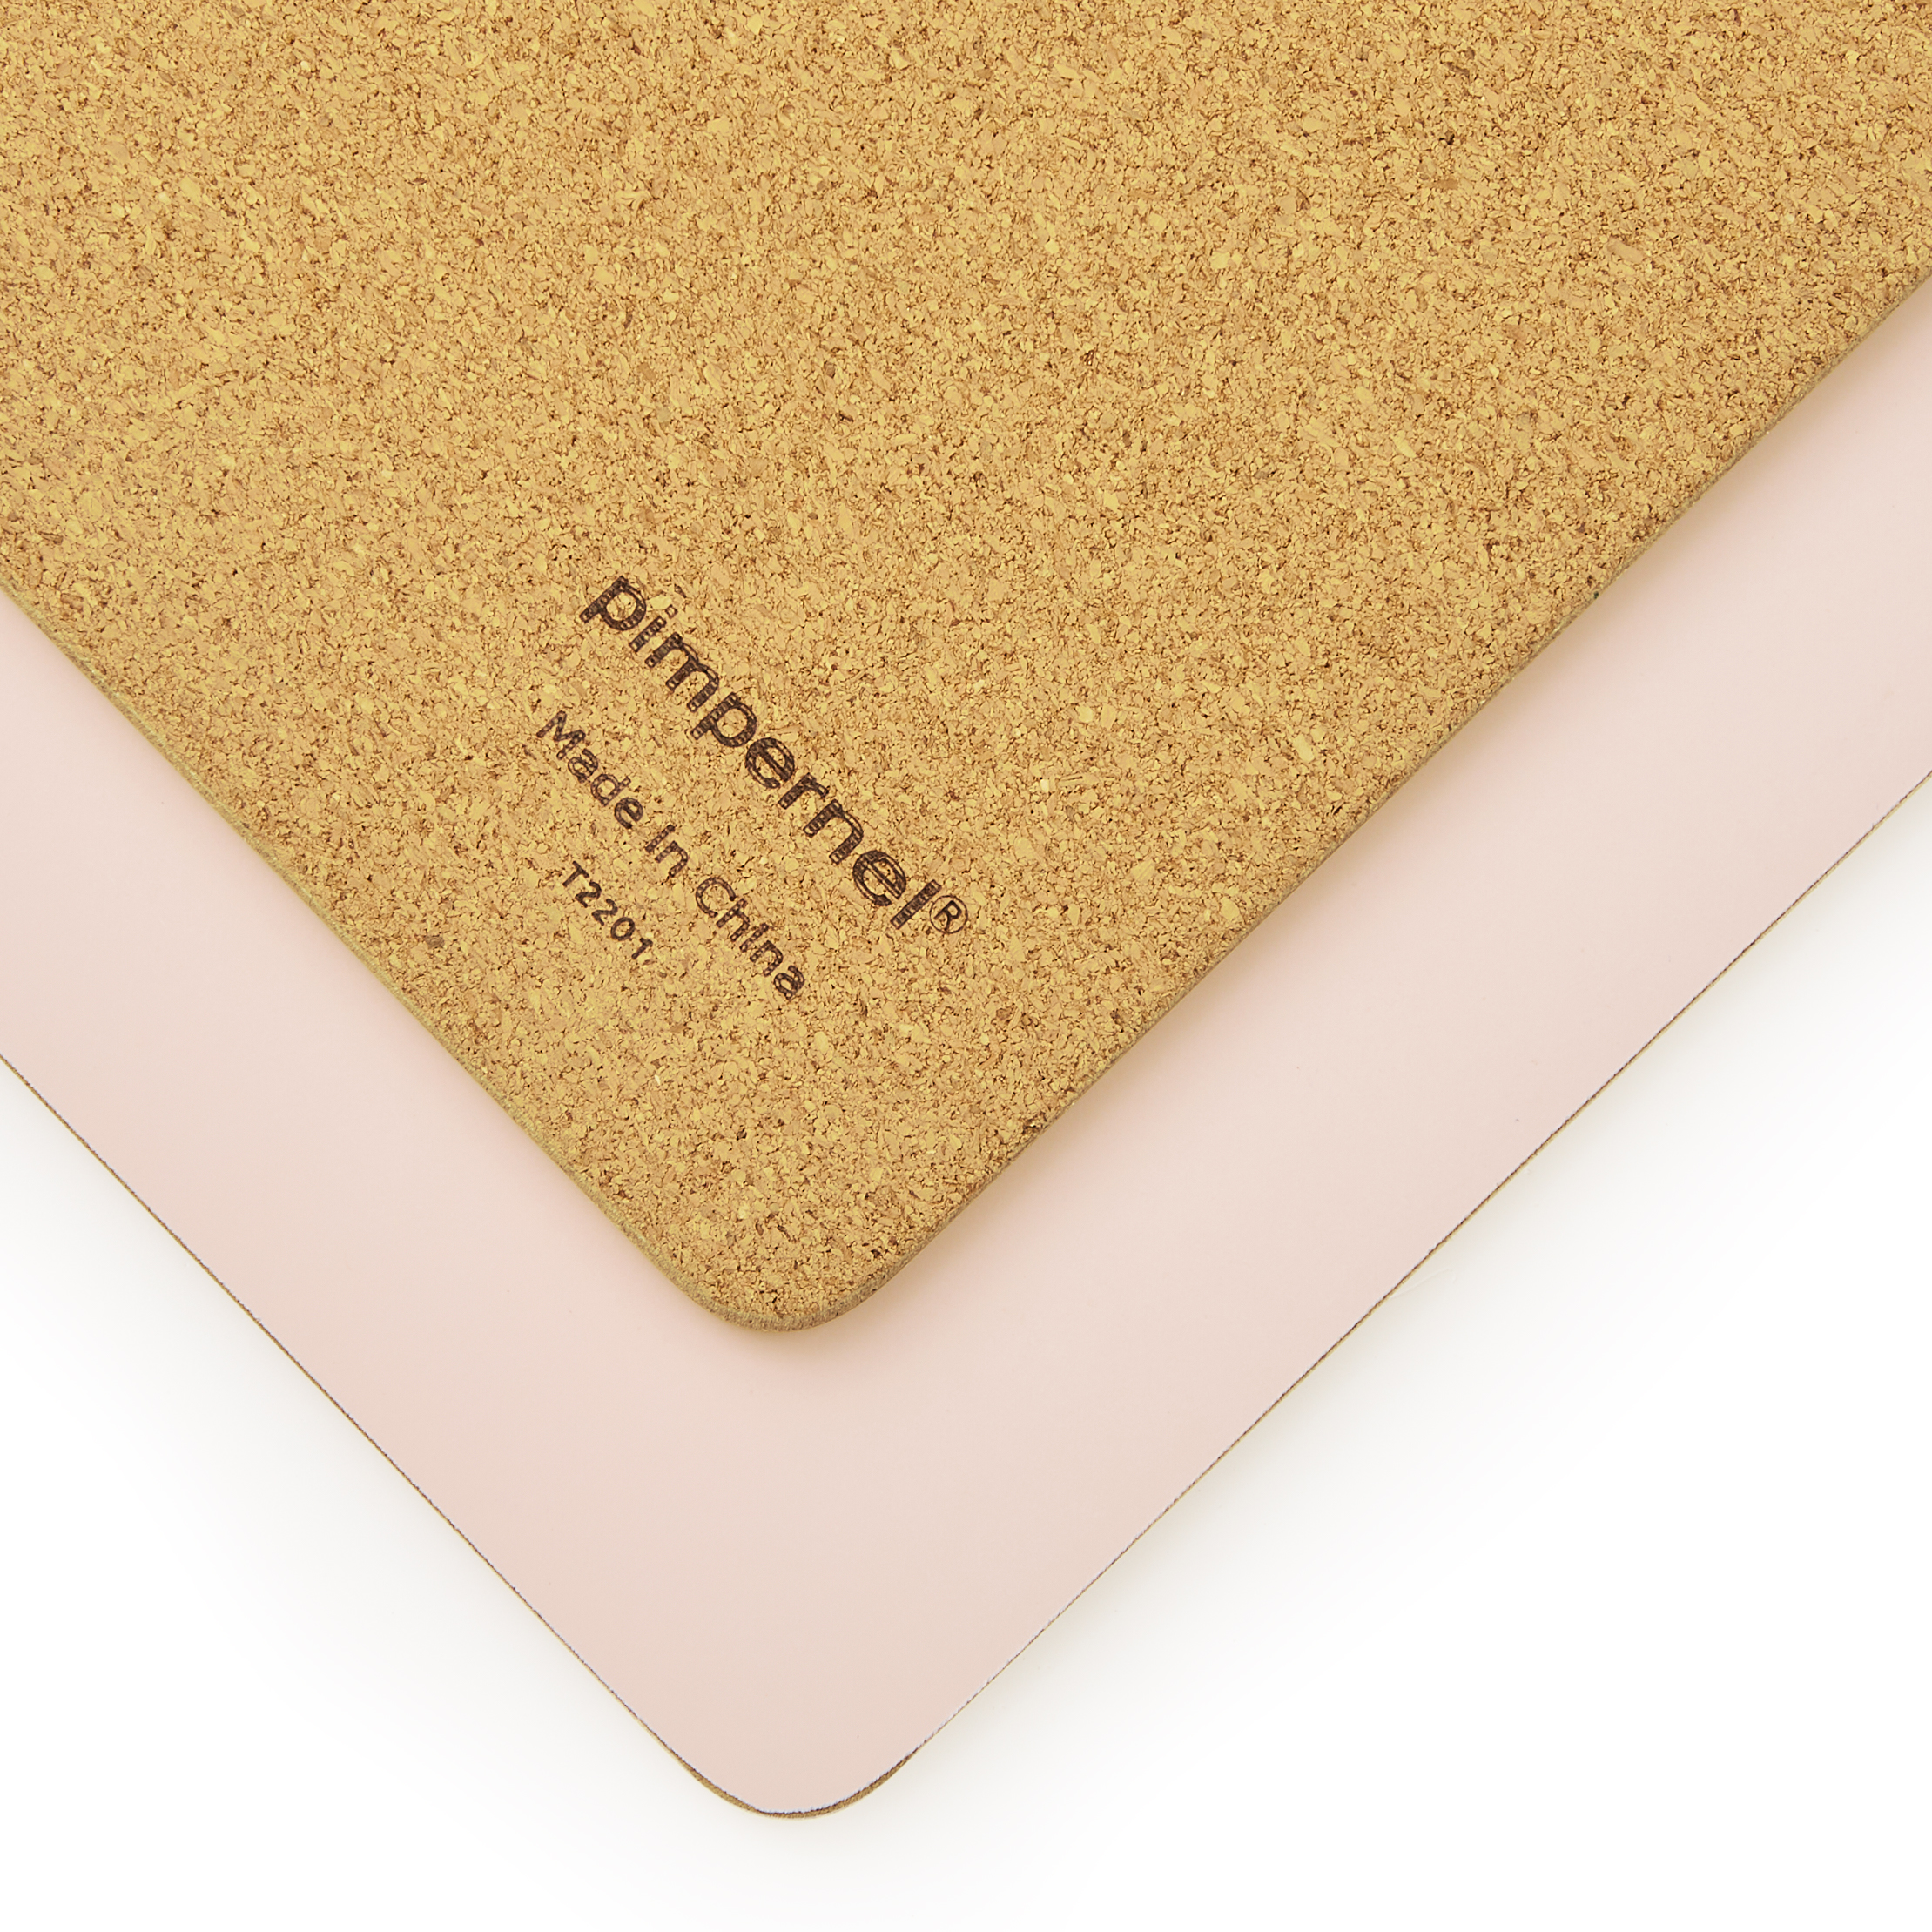 Millenial Pink Placemats Set of 4 image number null